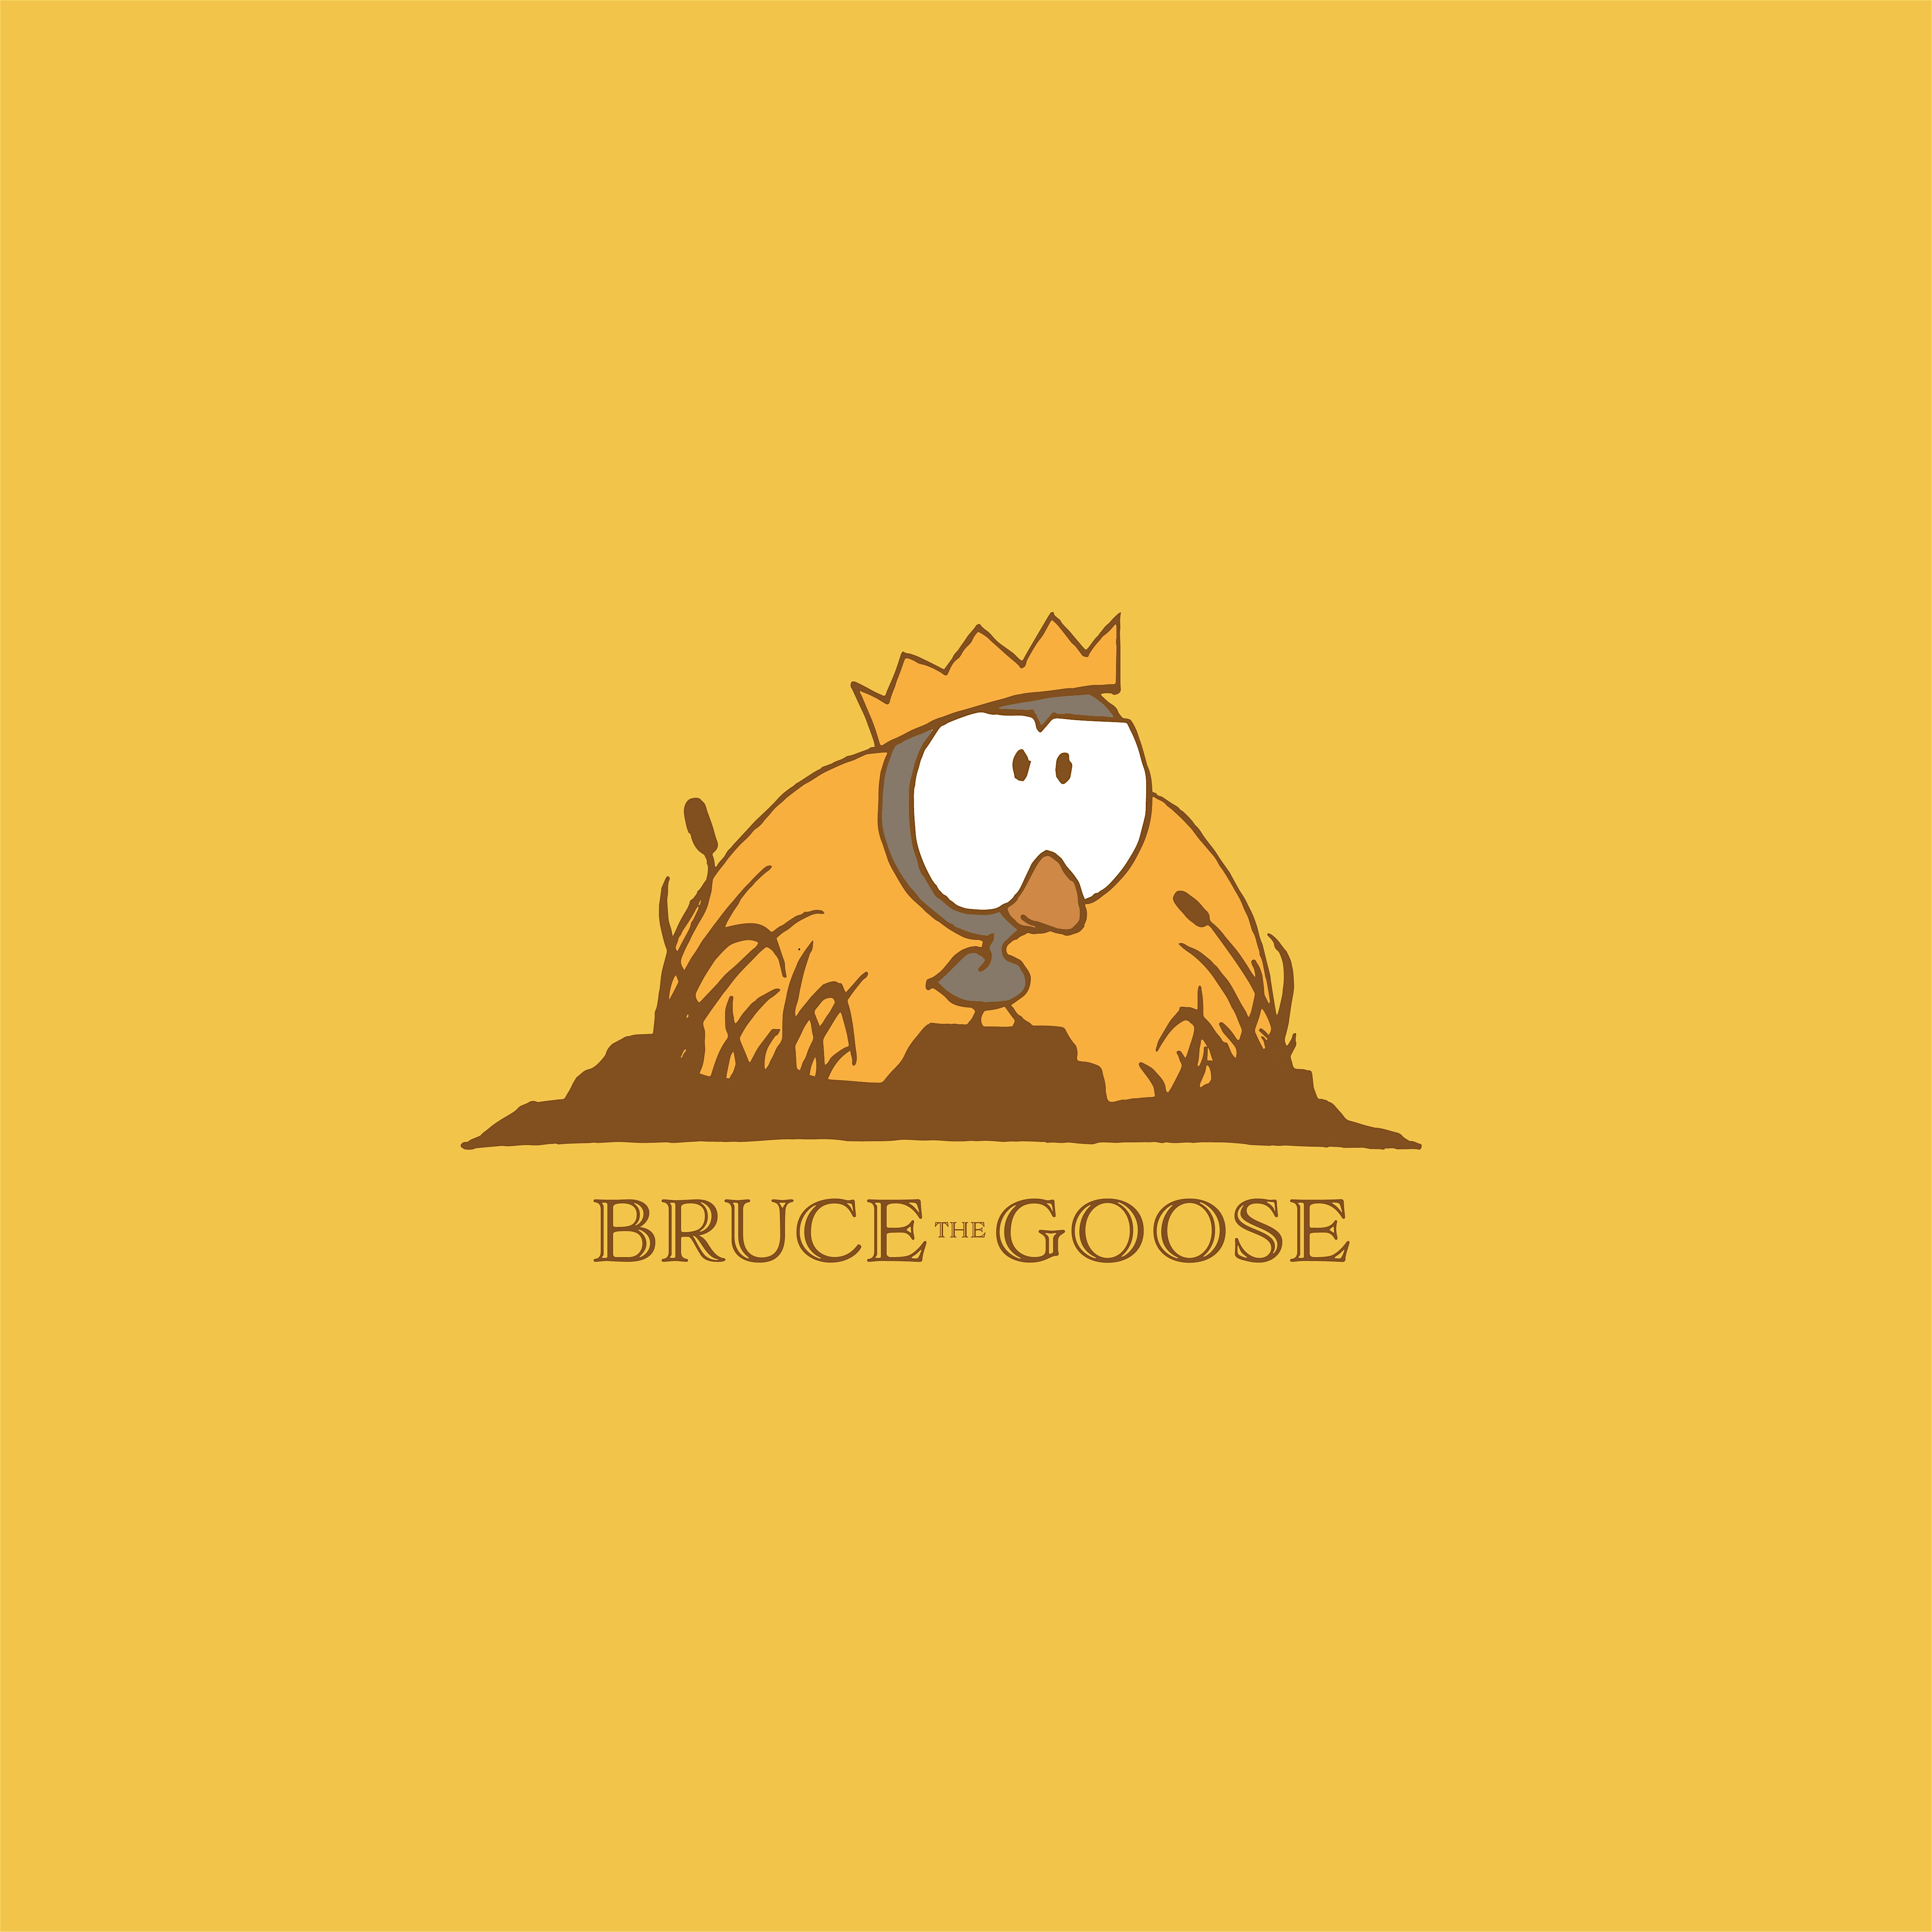 Bruce the Goose - Presented by Save the Musicals